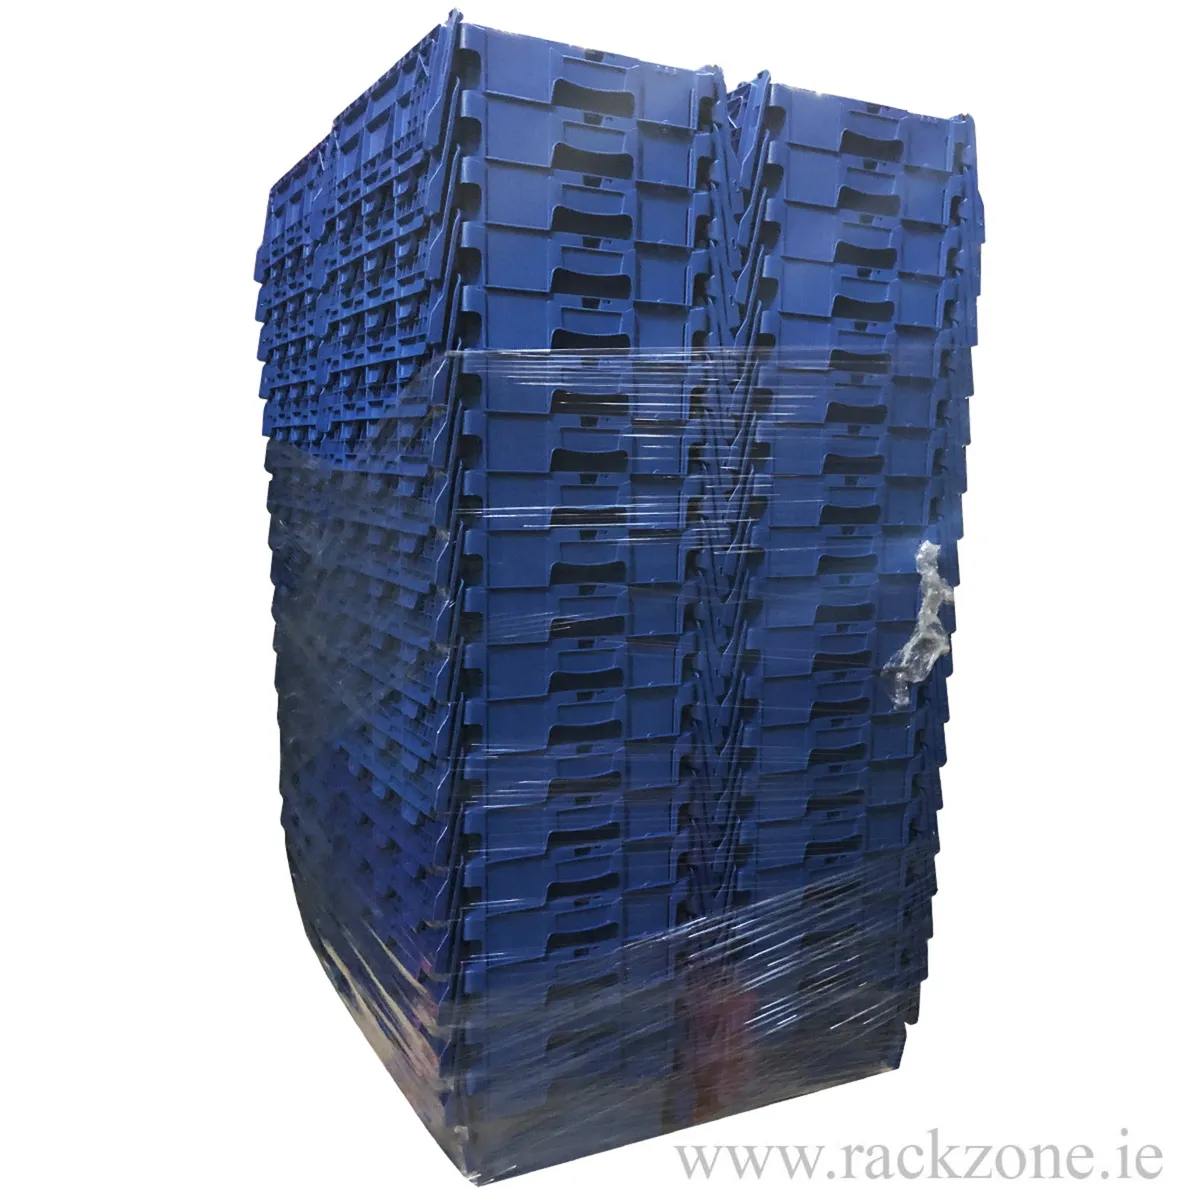 Pallet Deal - Attached Lid Containers 28L 600d x 4